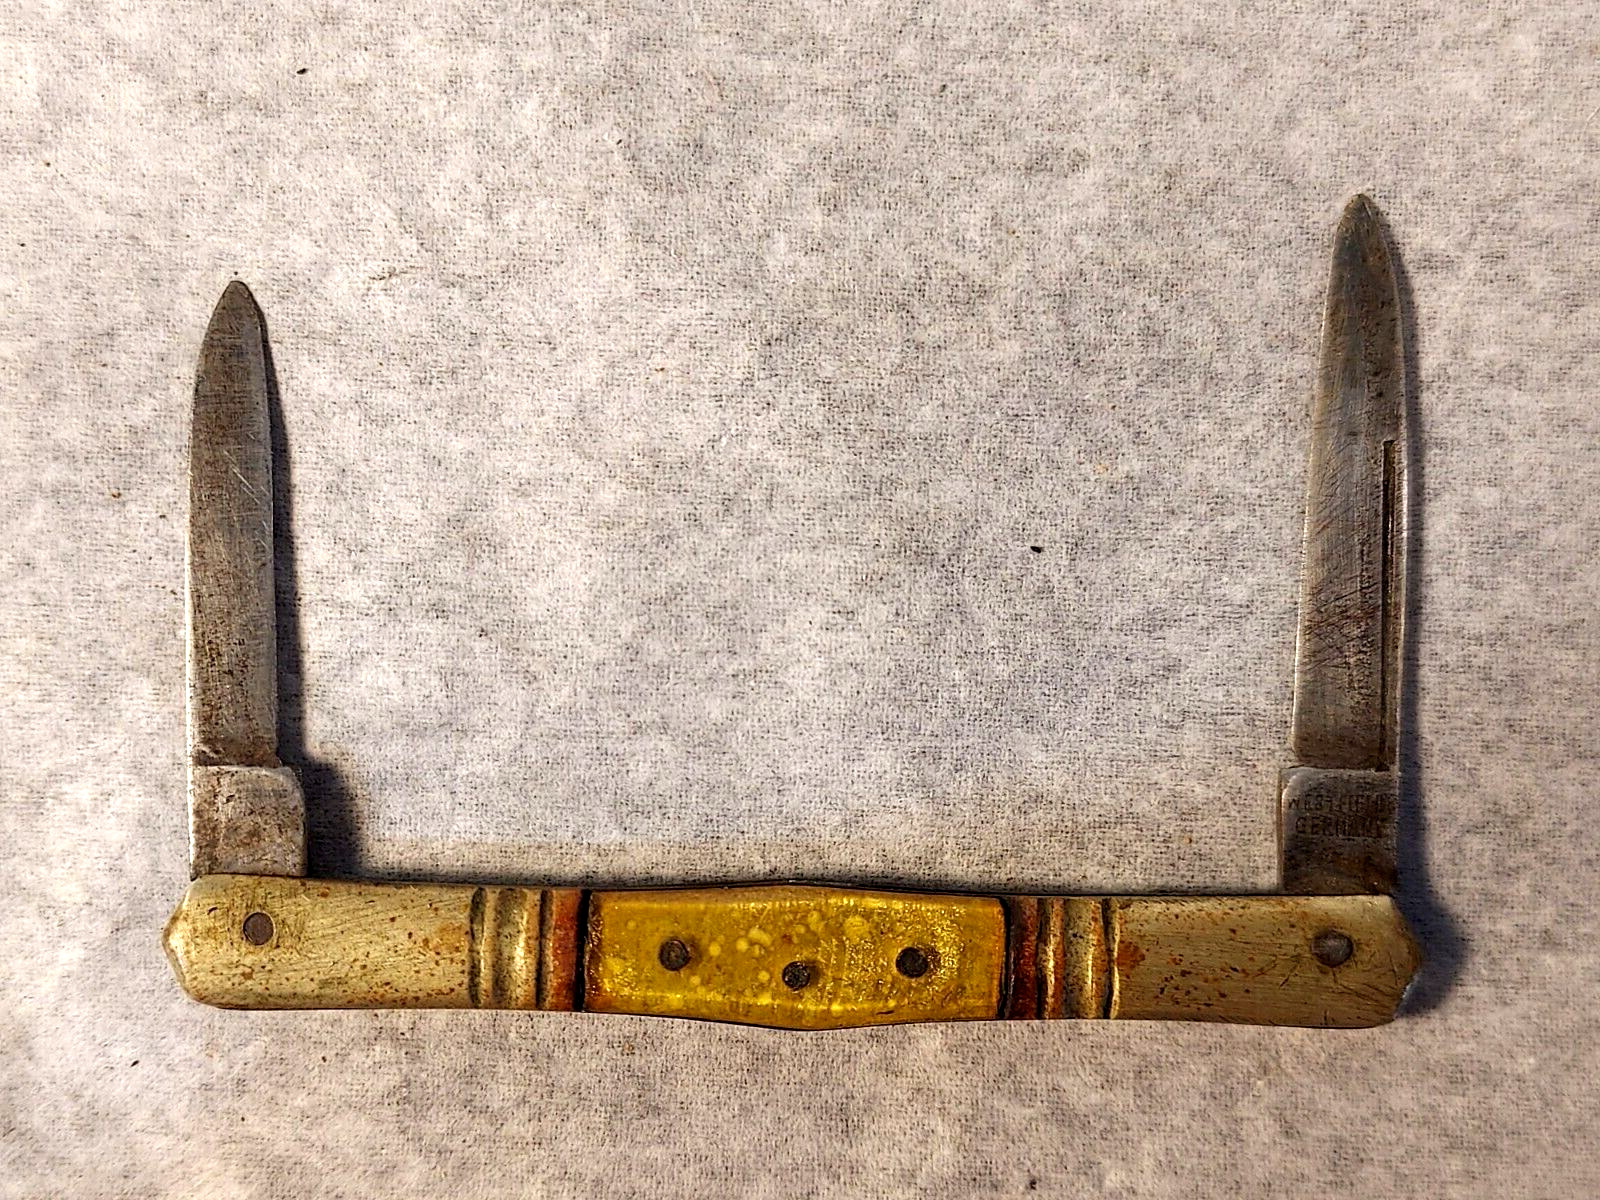 Rare Vintage Westfield Manufacturing Co. Germany-2 Blade Small Knife Pocketknife